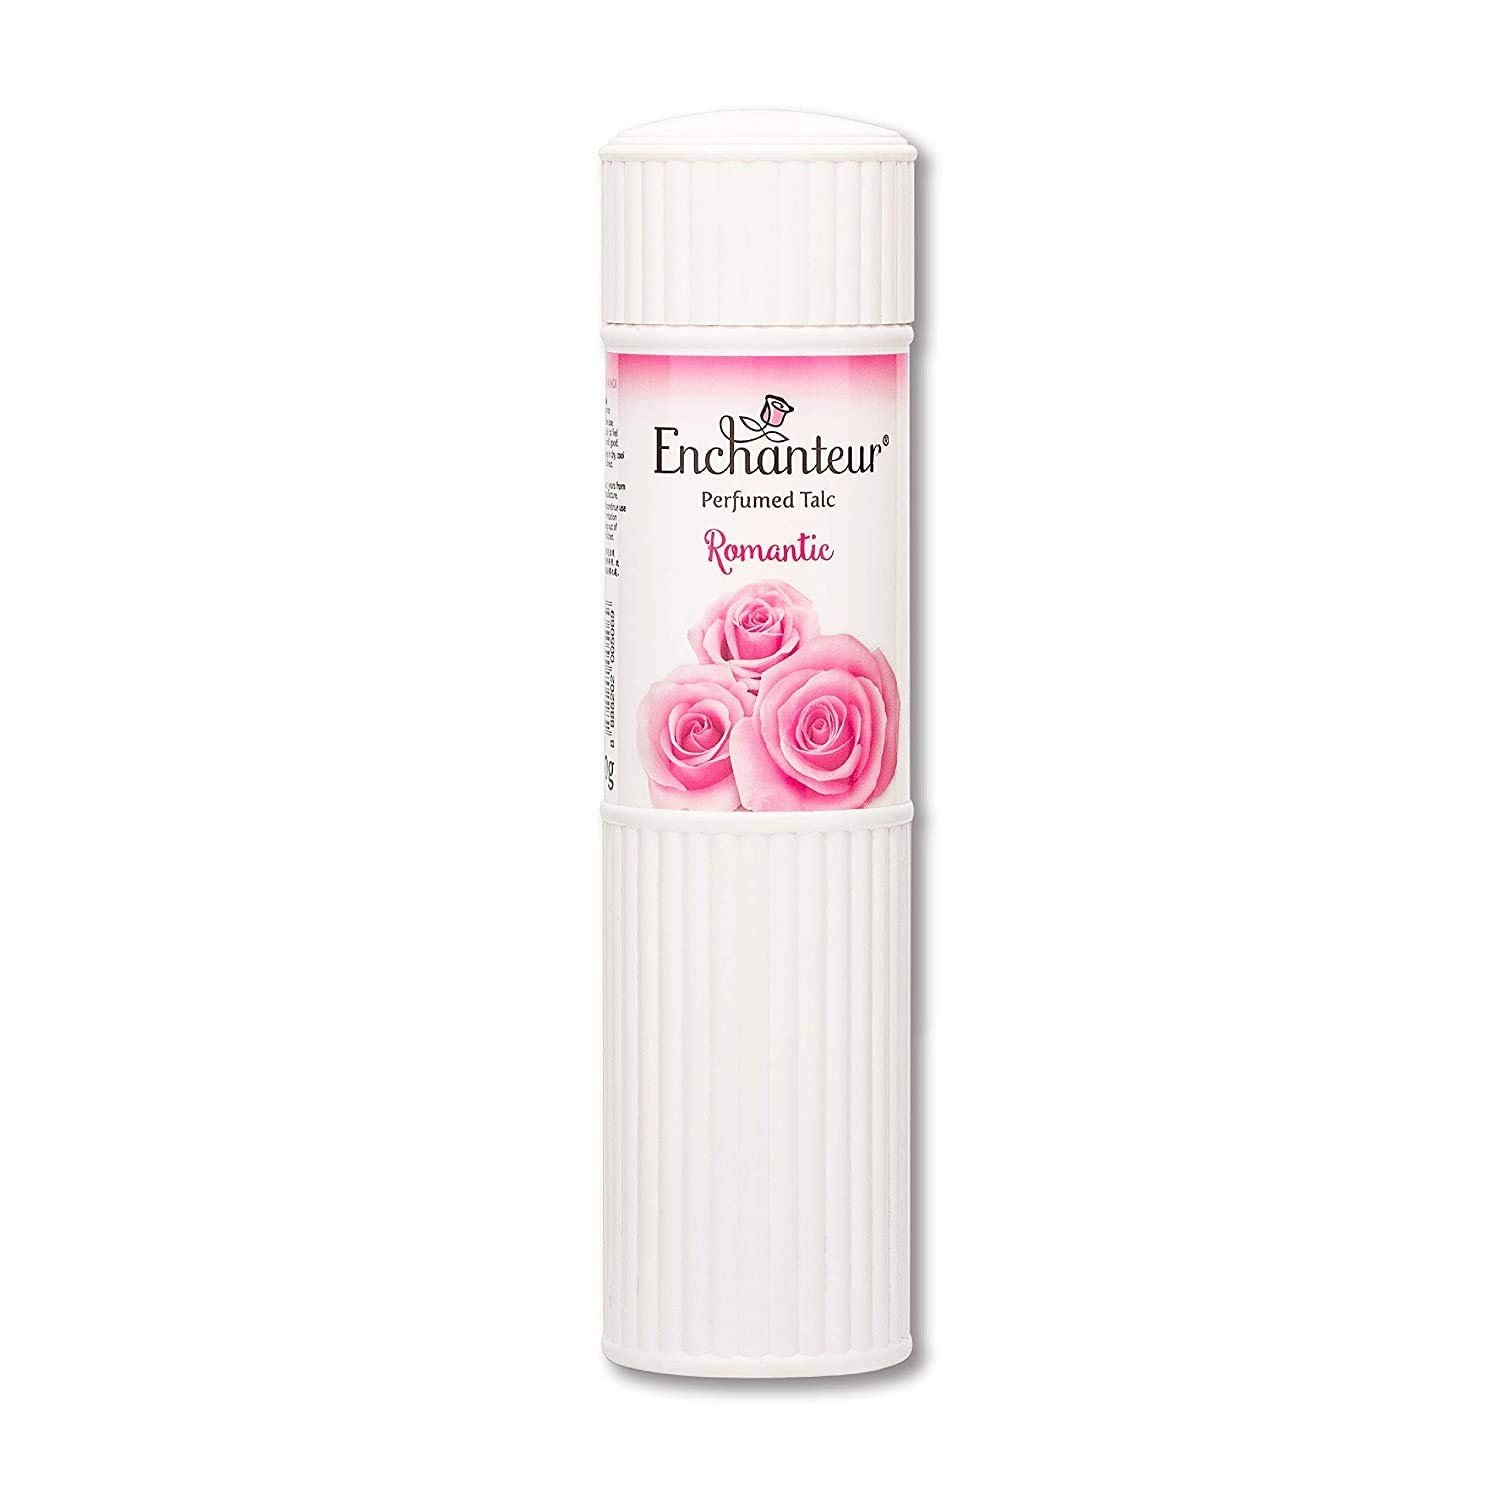 Enchanteur Romantic Perfumed Talc for Women, 250g with Roses & Jasmine Extracts